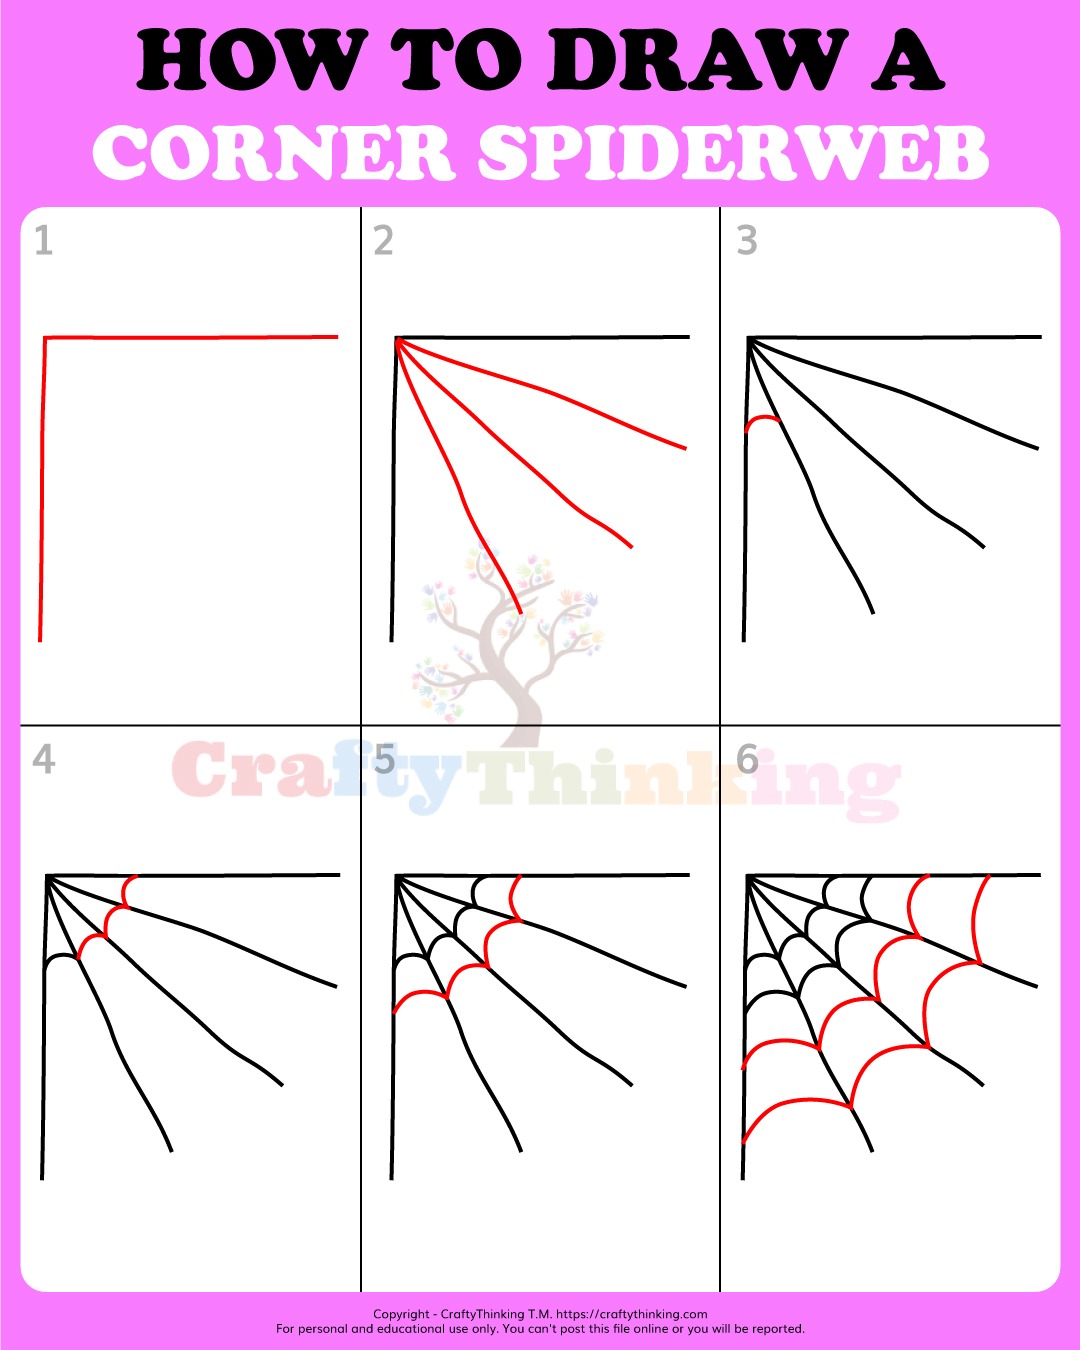 How To Draw A Spiderweb (Step by Step) CraftyThinking